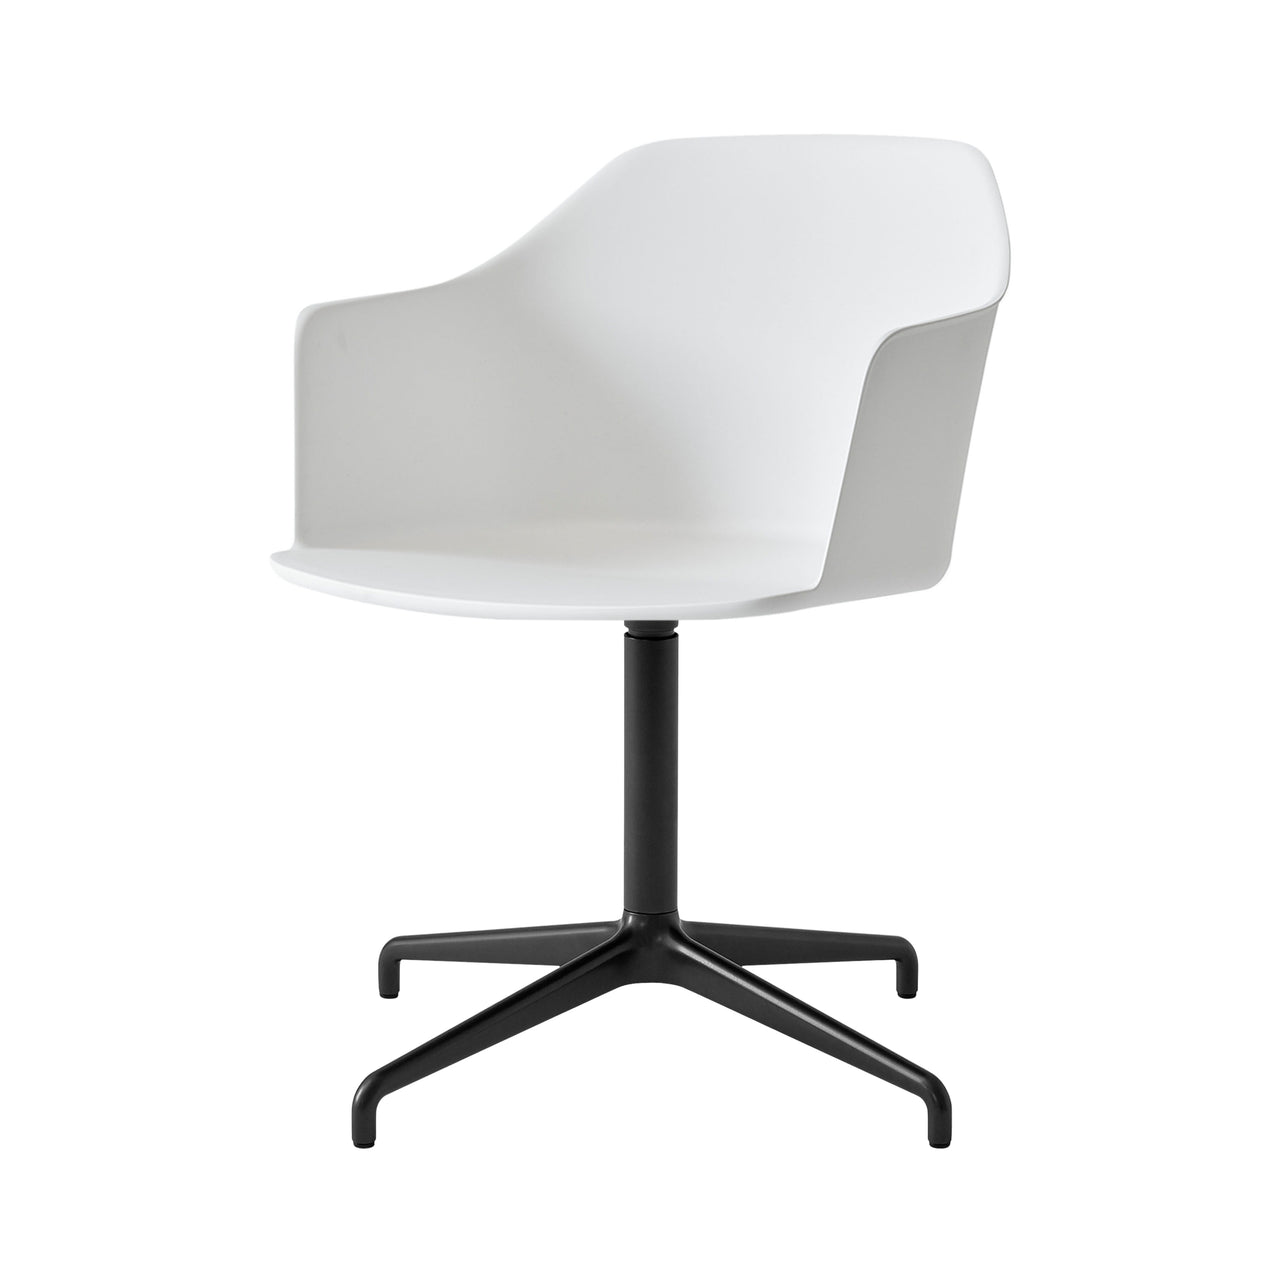 Rely Chair HW38: White + Black